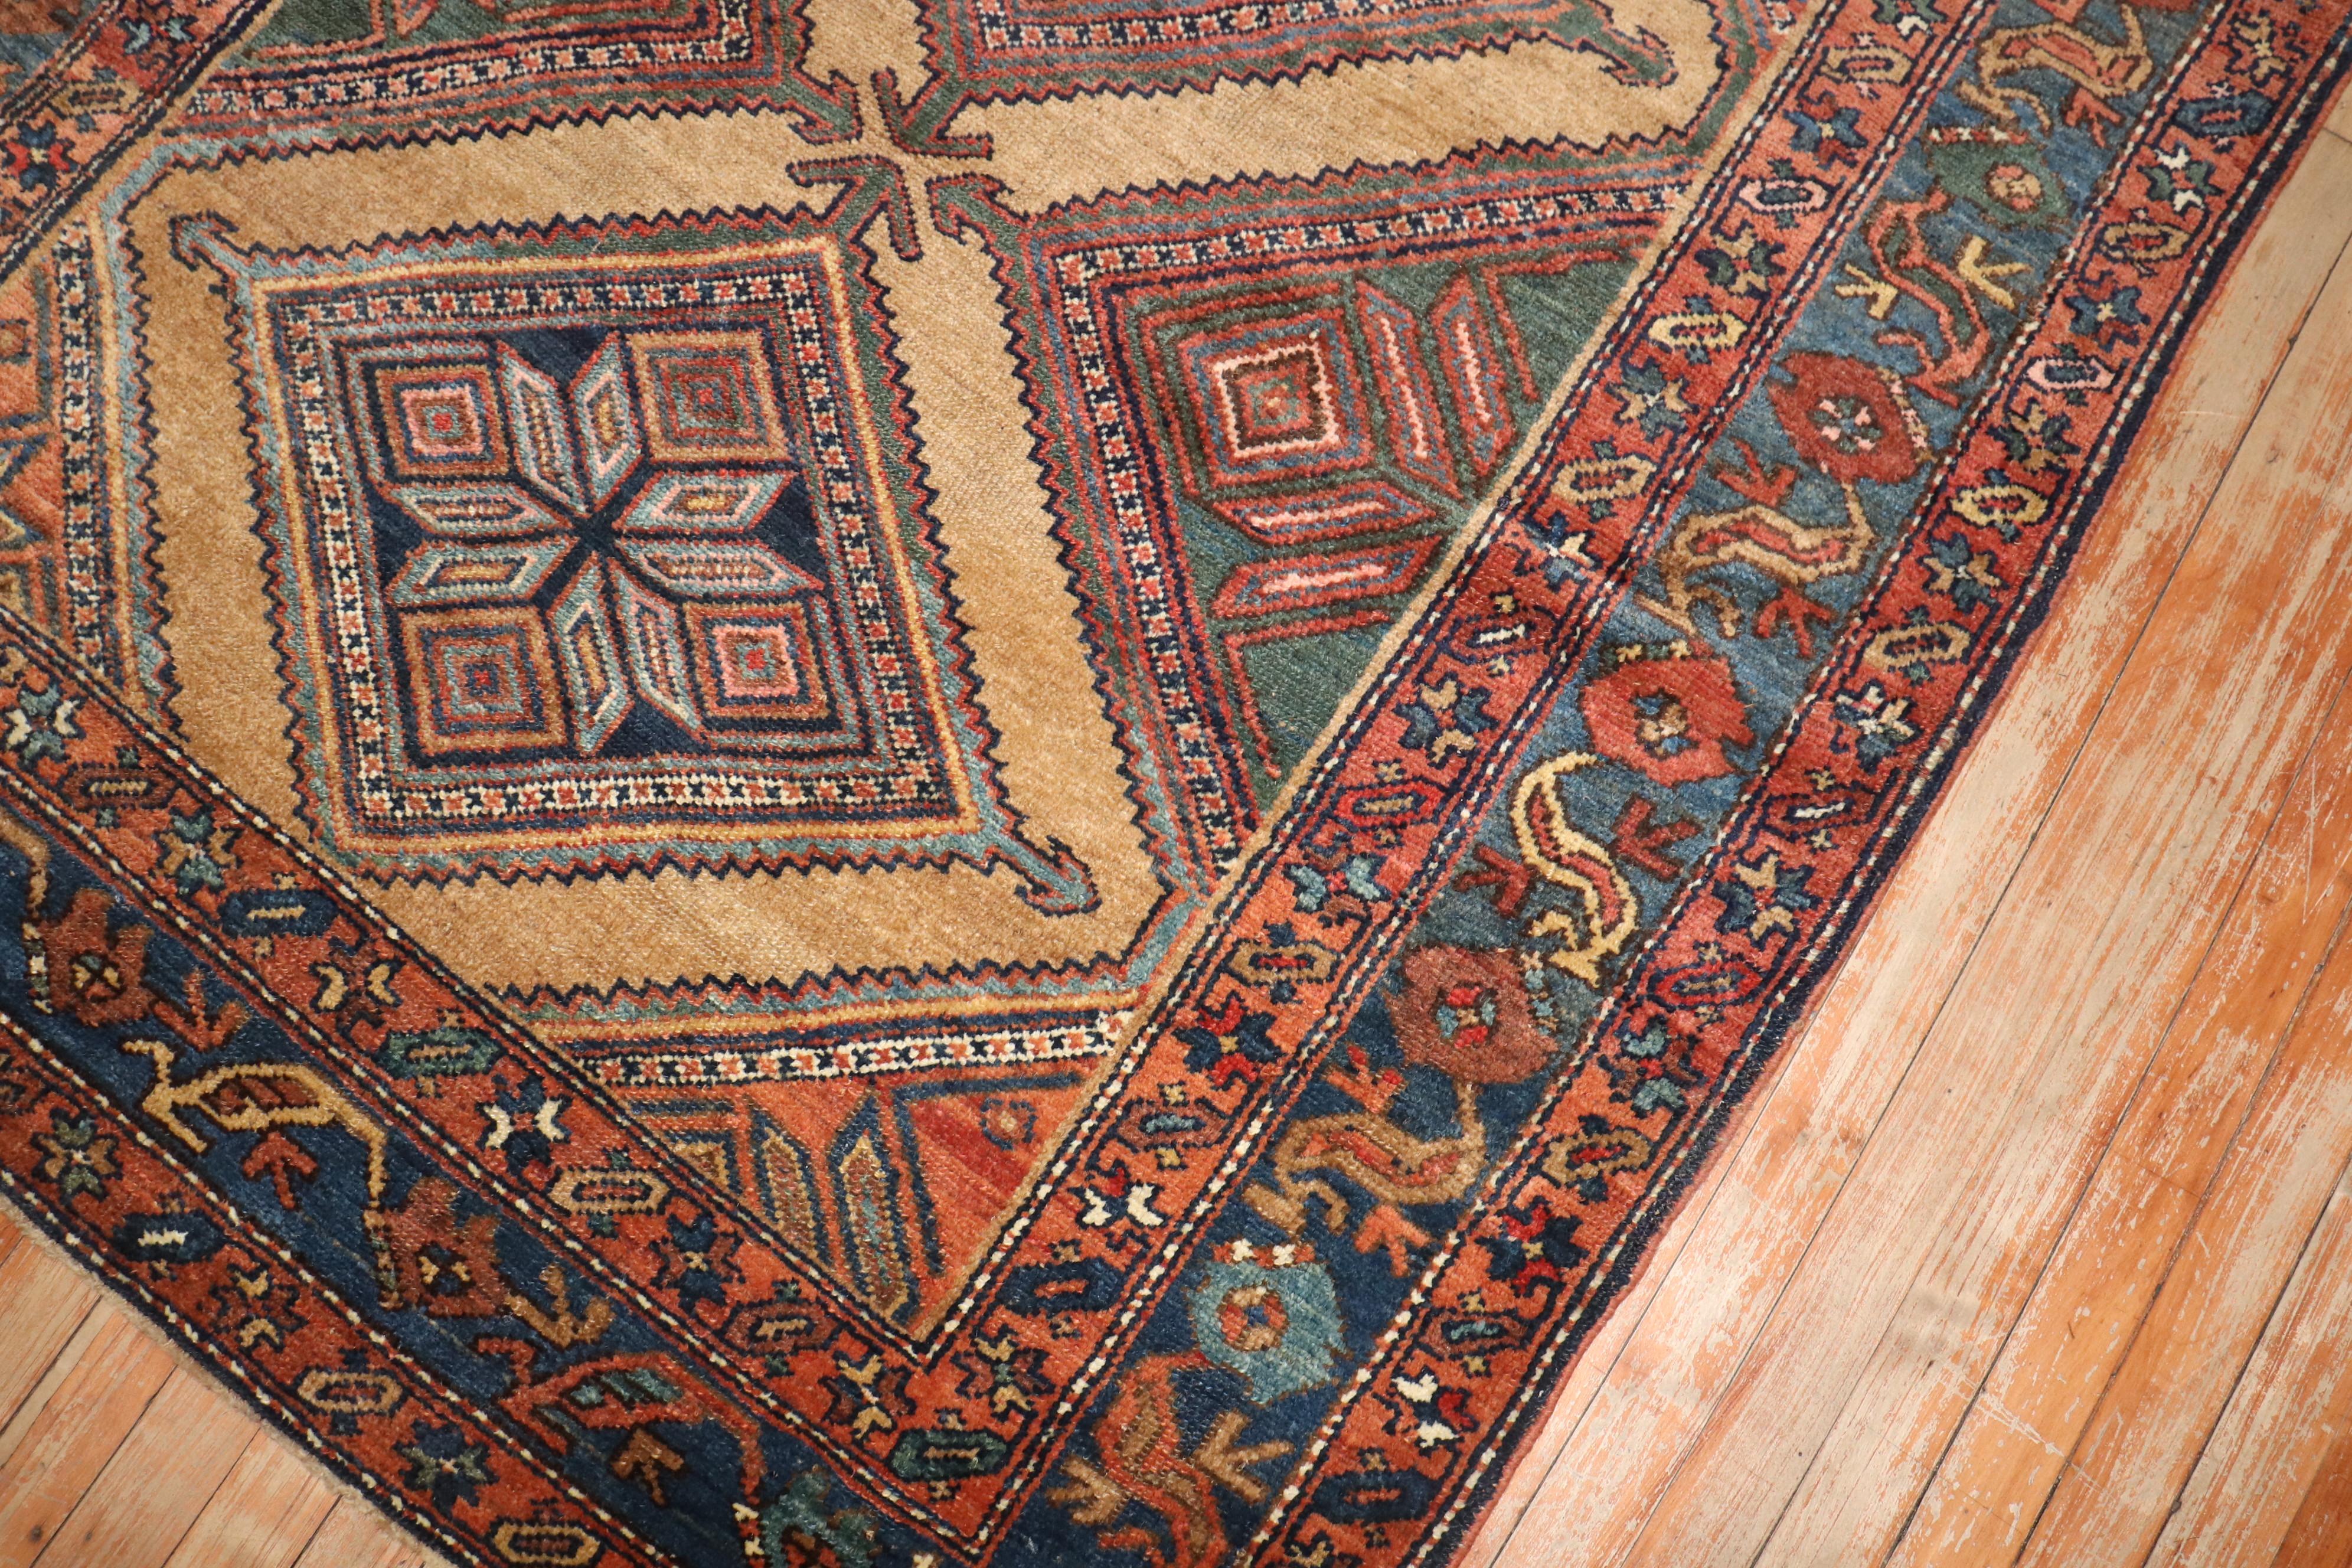 An early 20th century tribal highly decorative Persian Serab wide runner. Great quality and great condition. Accents in blue brow and green on camel brown tone ground

Measures: 4'8